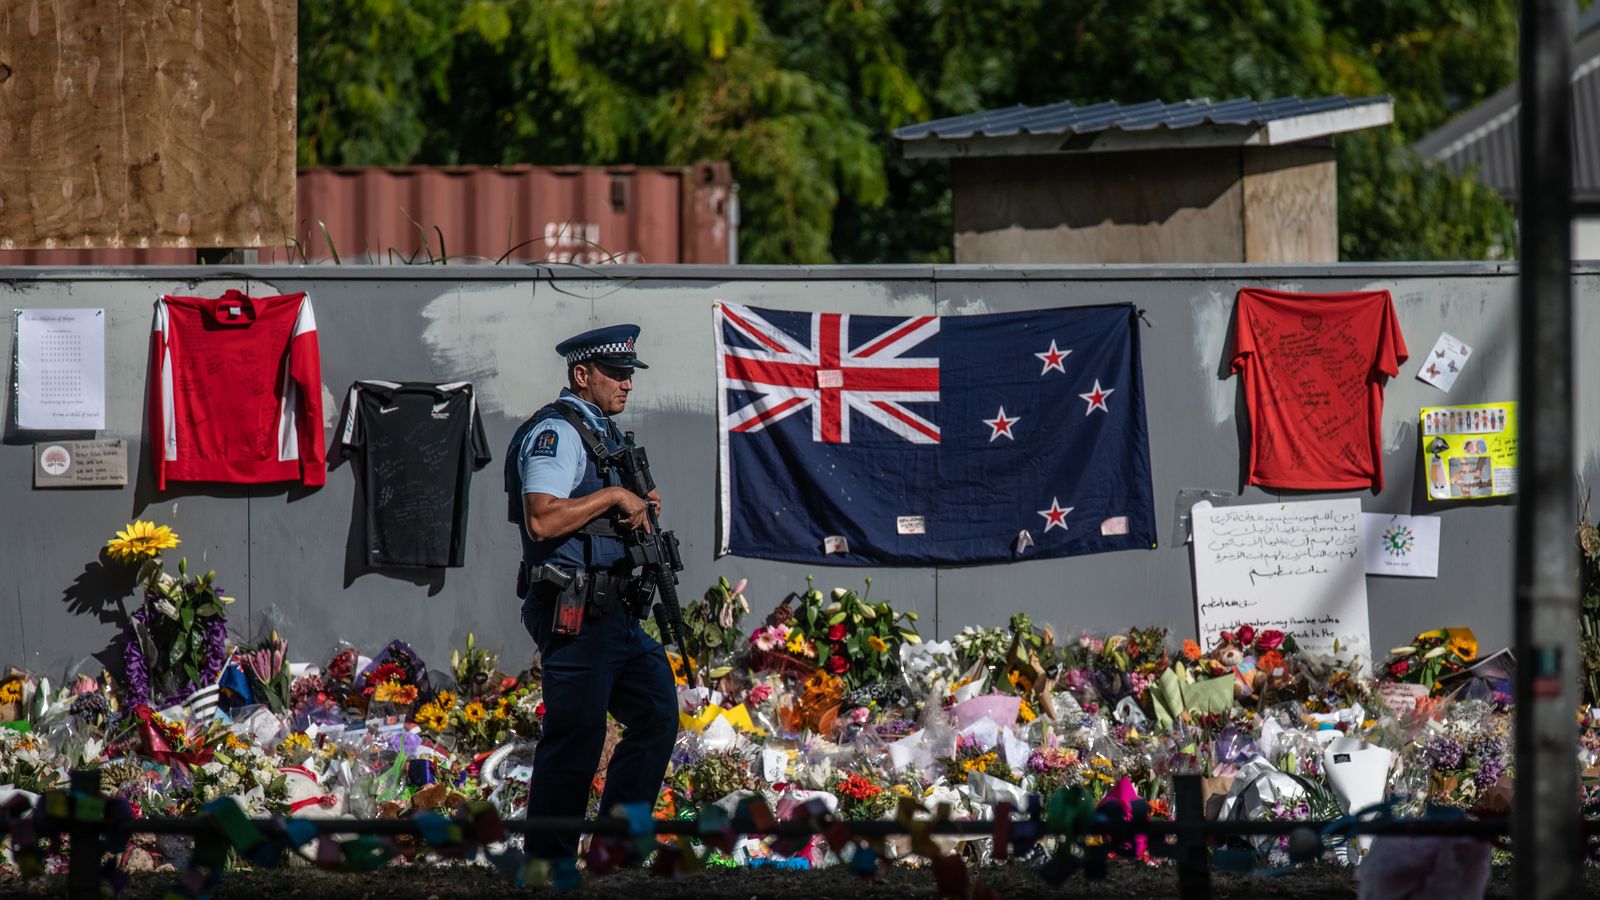 christchurch shooting live stream footage video